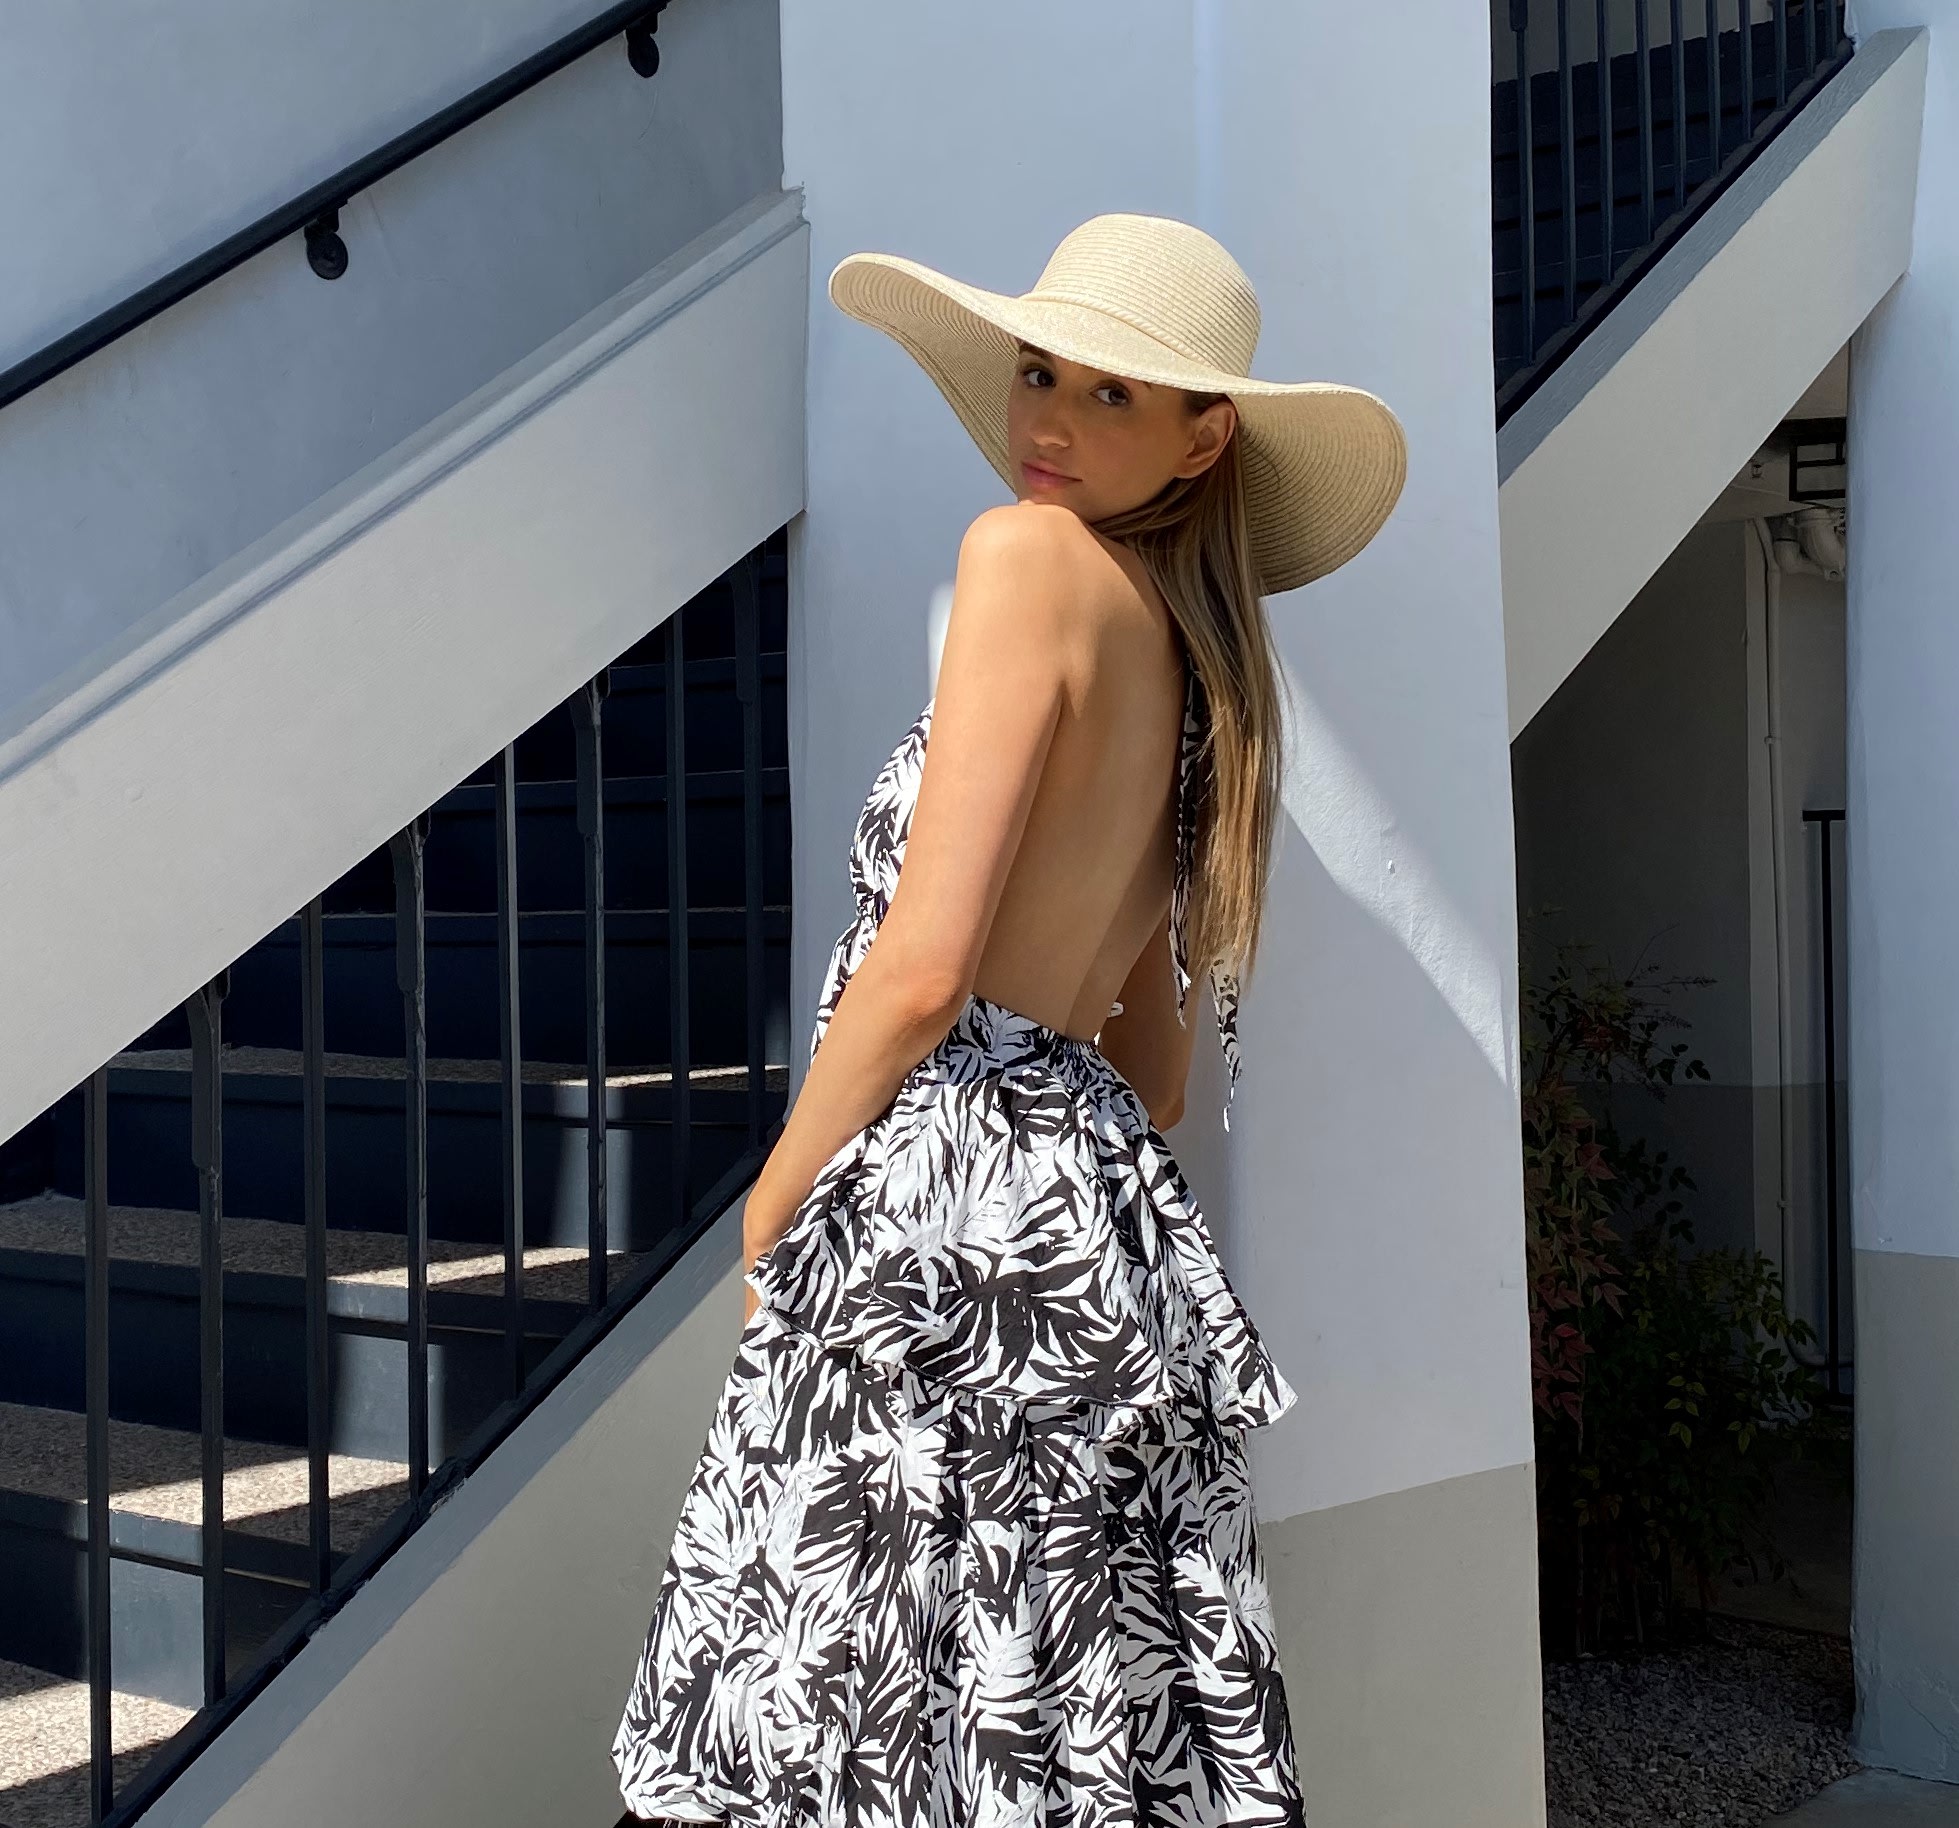 Vacation Outfit Ideas: Resort Looks to Pack - Lulus.com Fashion Blog